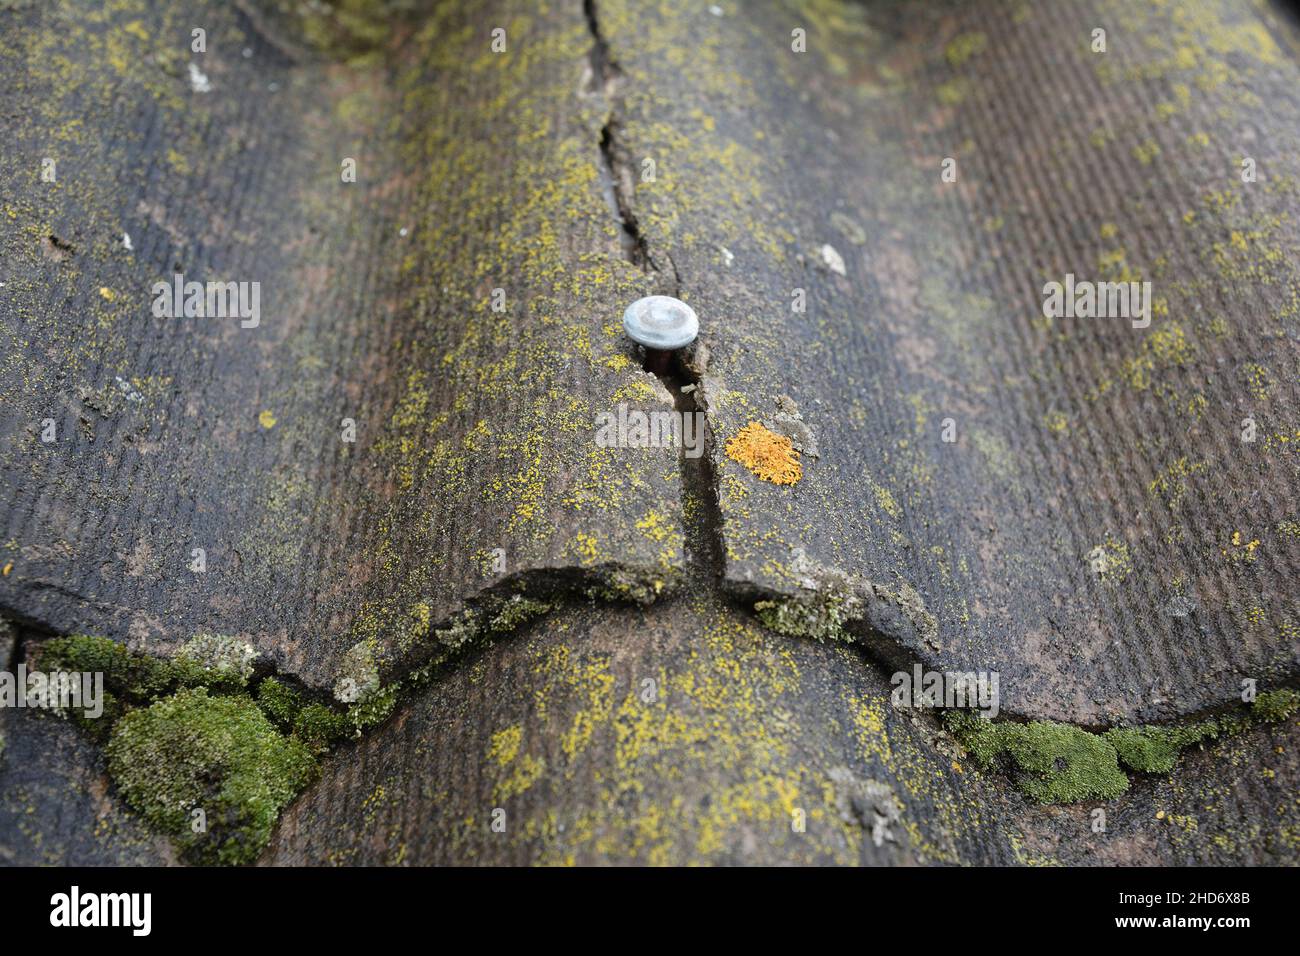 Asbestos roof. A close-up of an old cracked damaged asbestos roof tile covered with moss and lichen, dangerous for health that needs removal. Stock Photo